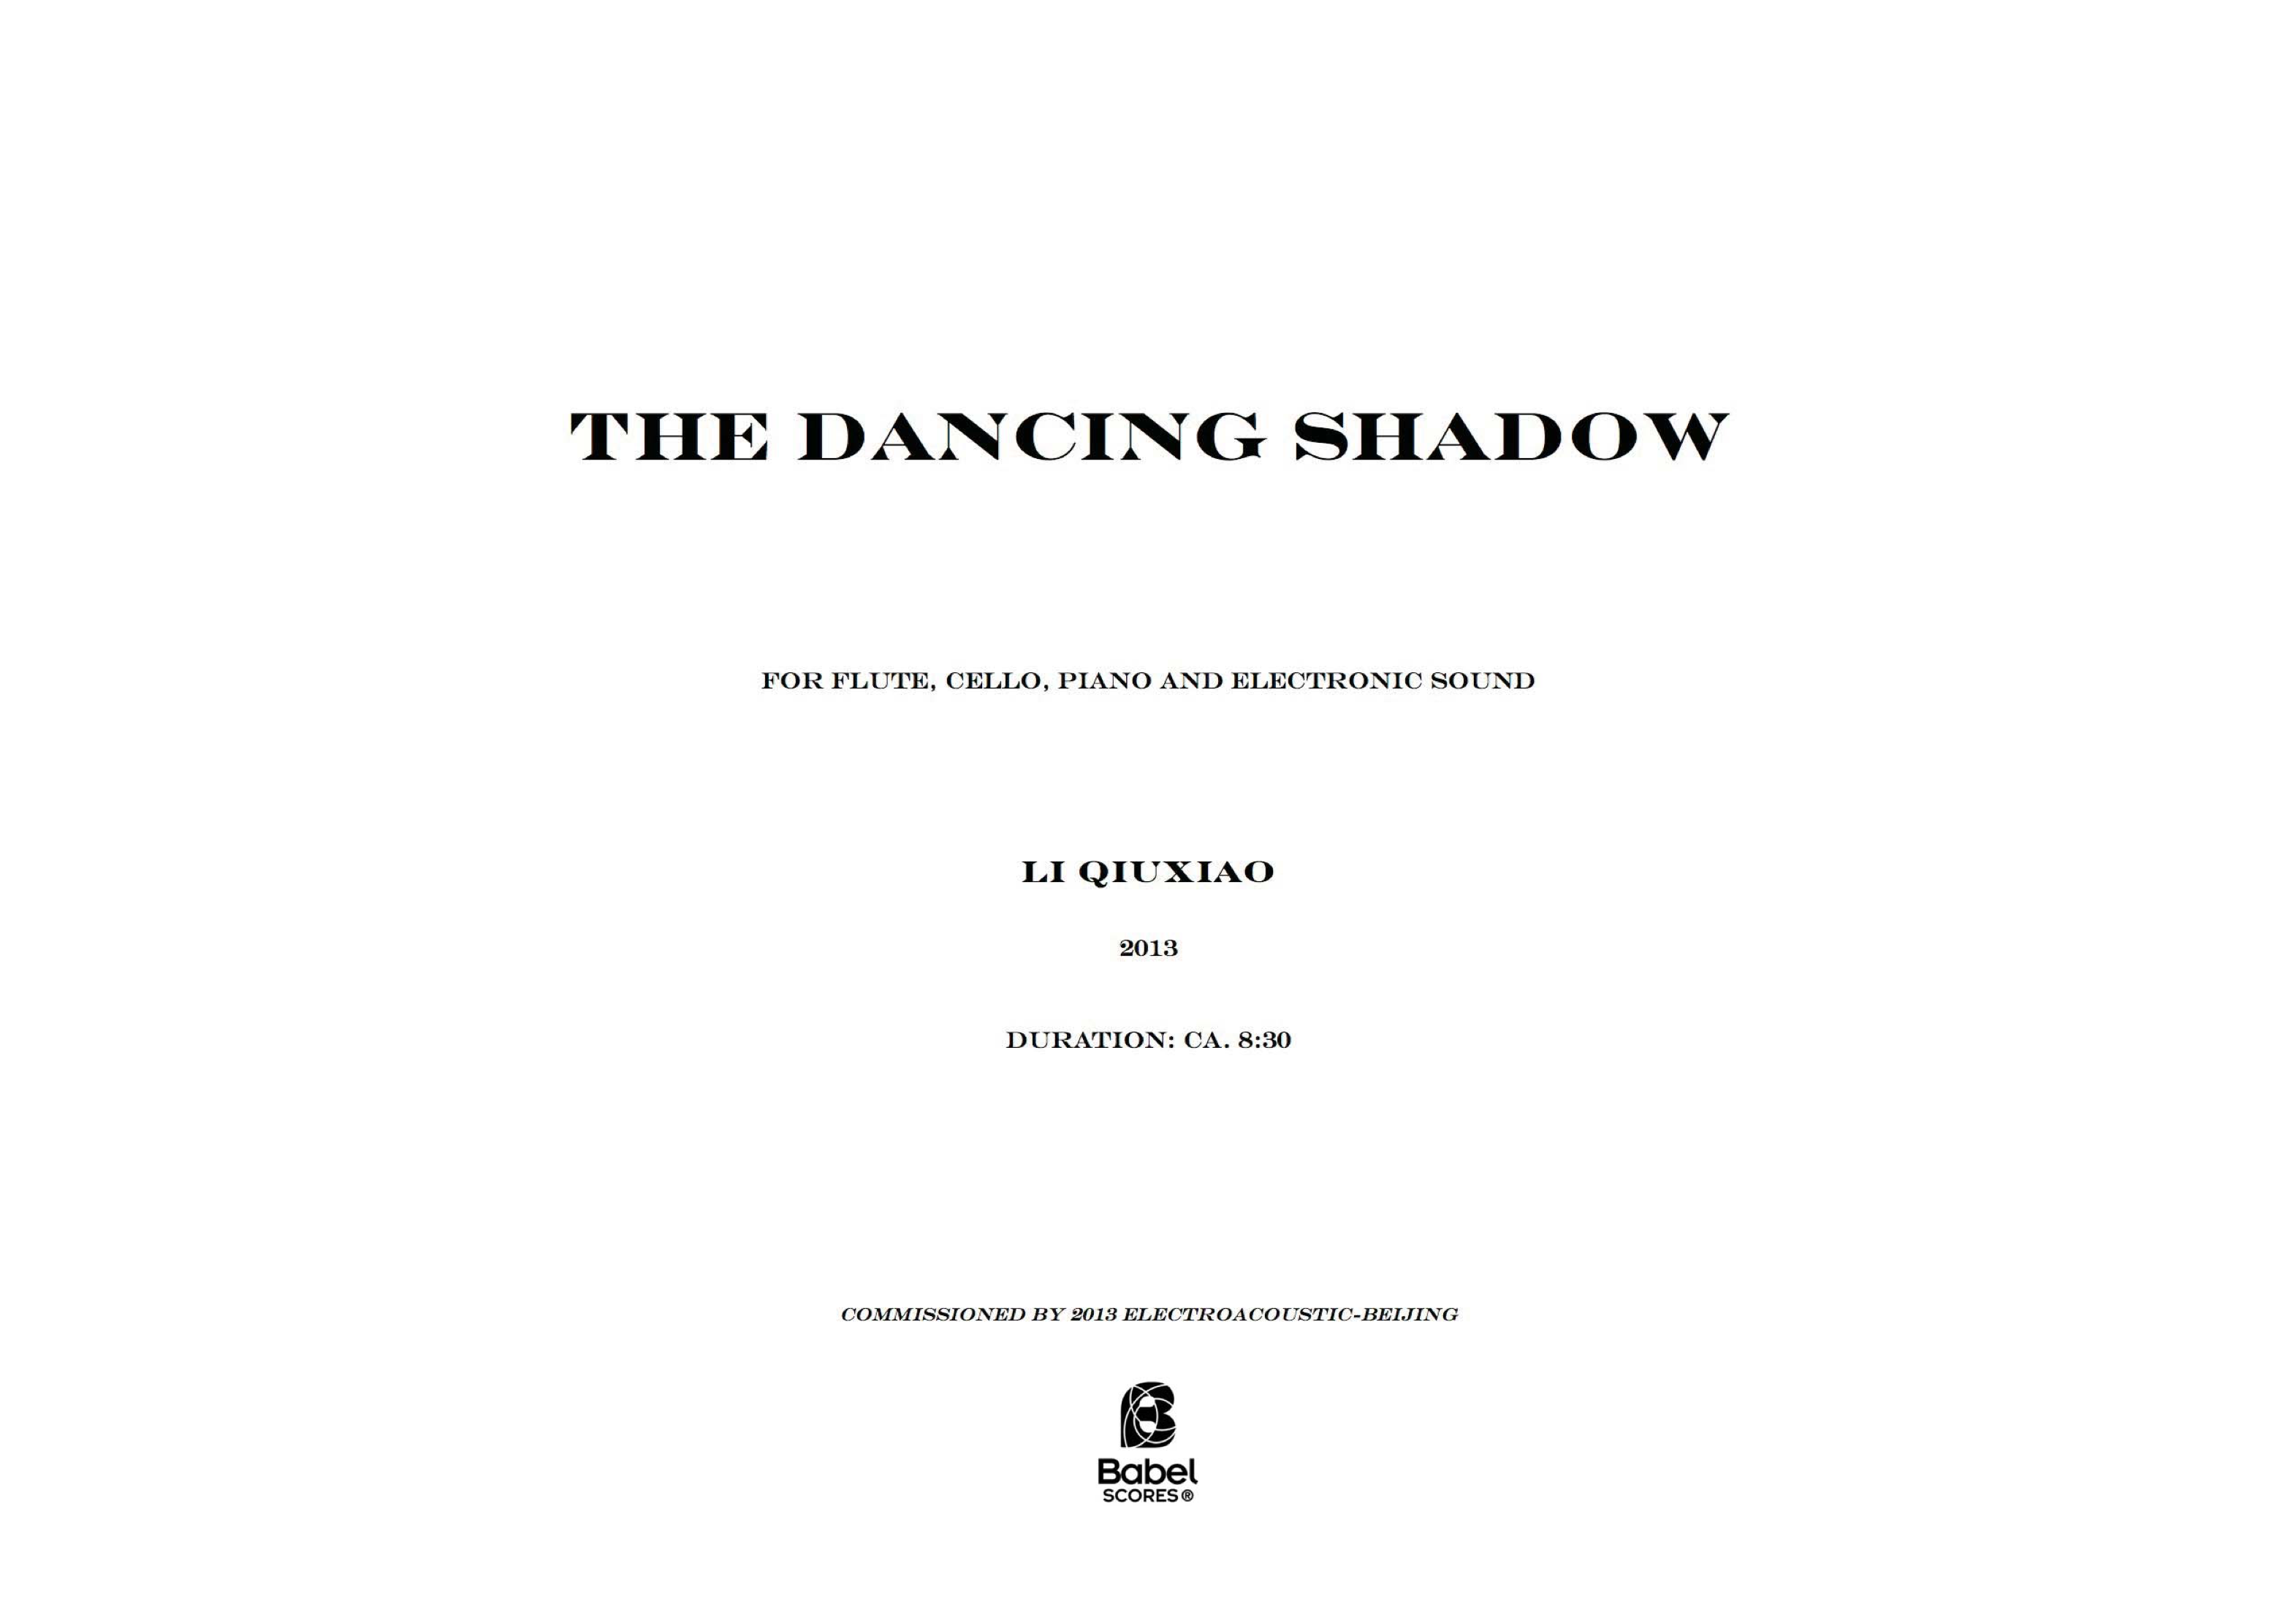 The dancing shadow A3 z